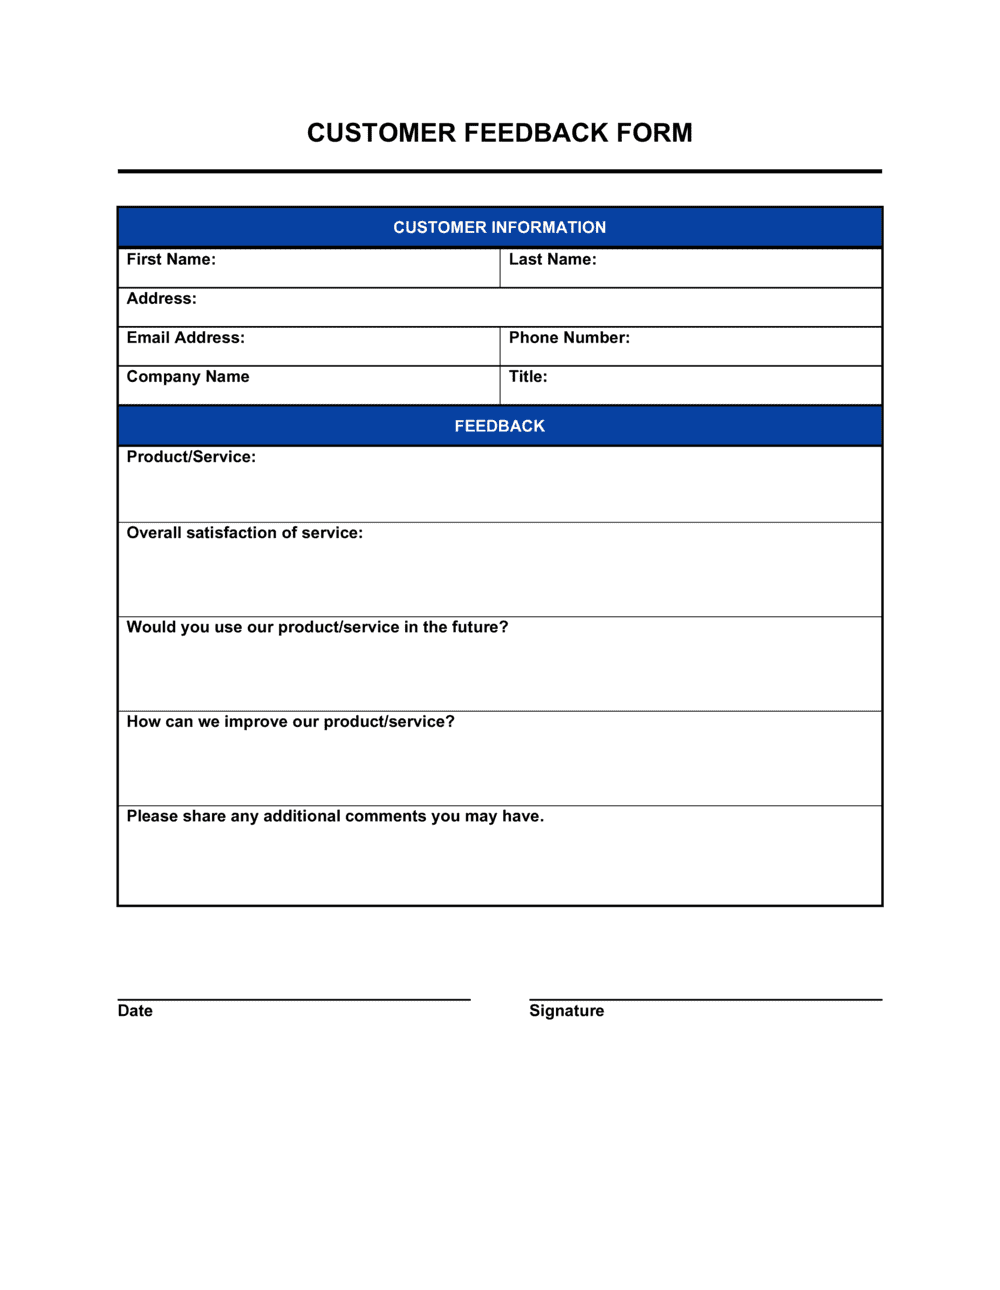 Customer Feedback Form Template by Business in a Box™